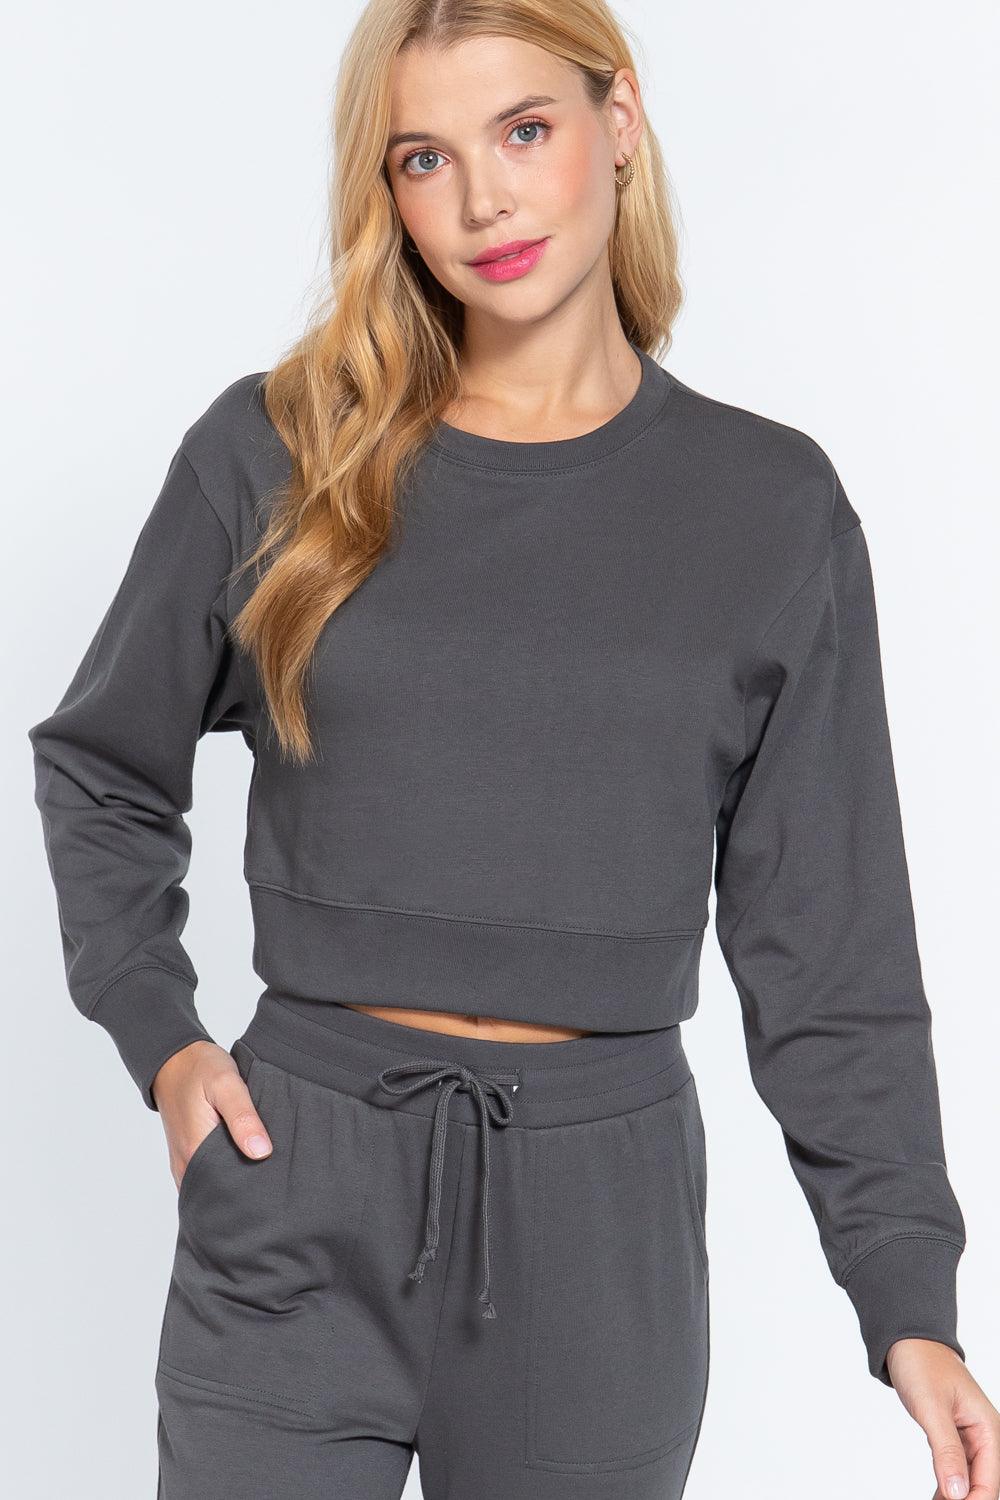 Buying Guide: Stylish and Healthy Dresses 2023 | Fashionably Fit | Long Sleeve Crew Neck Sweatshirt